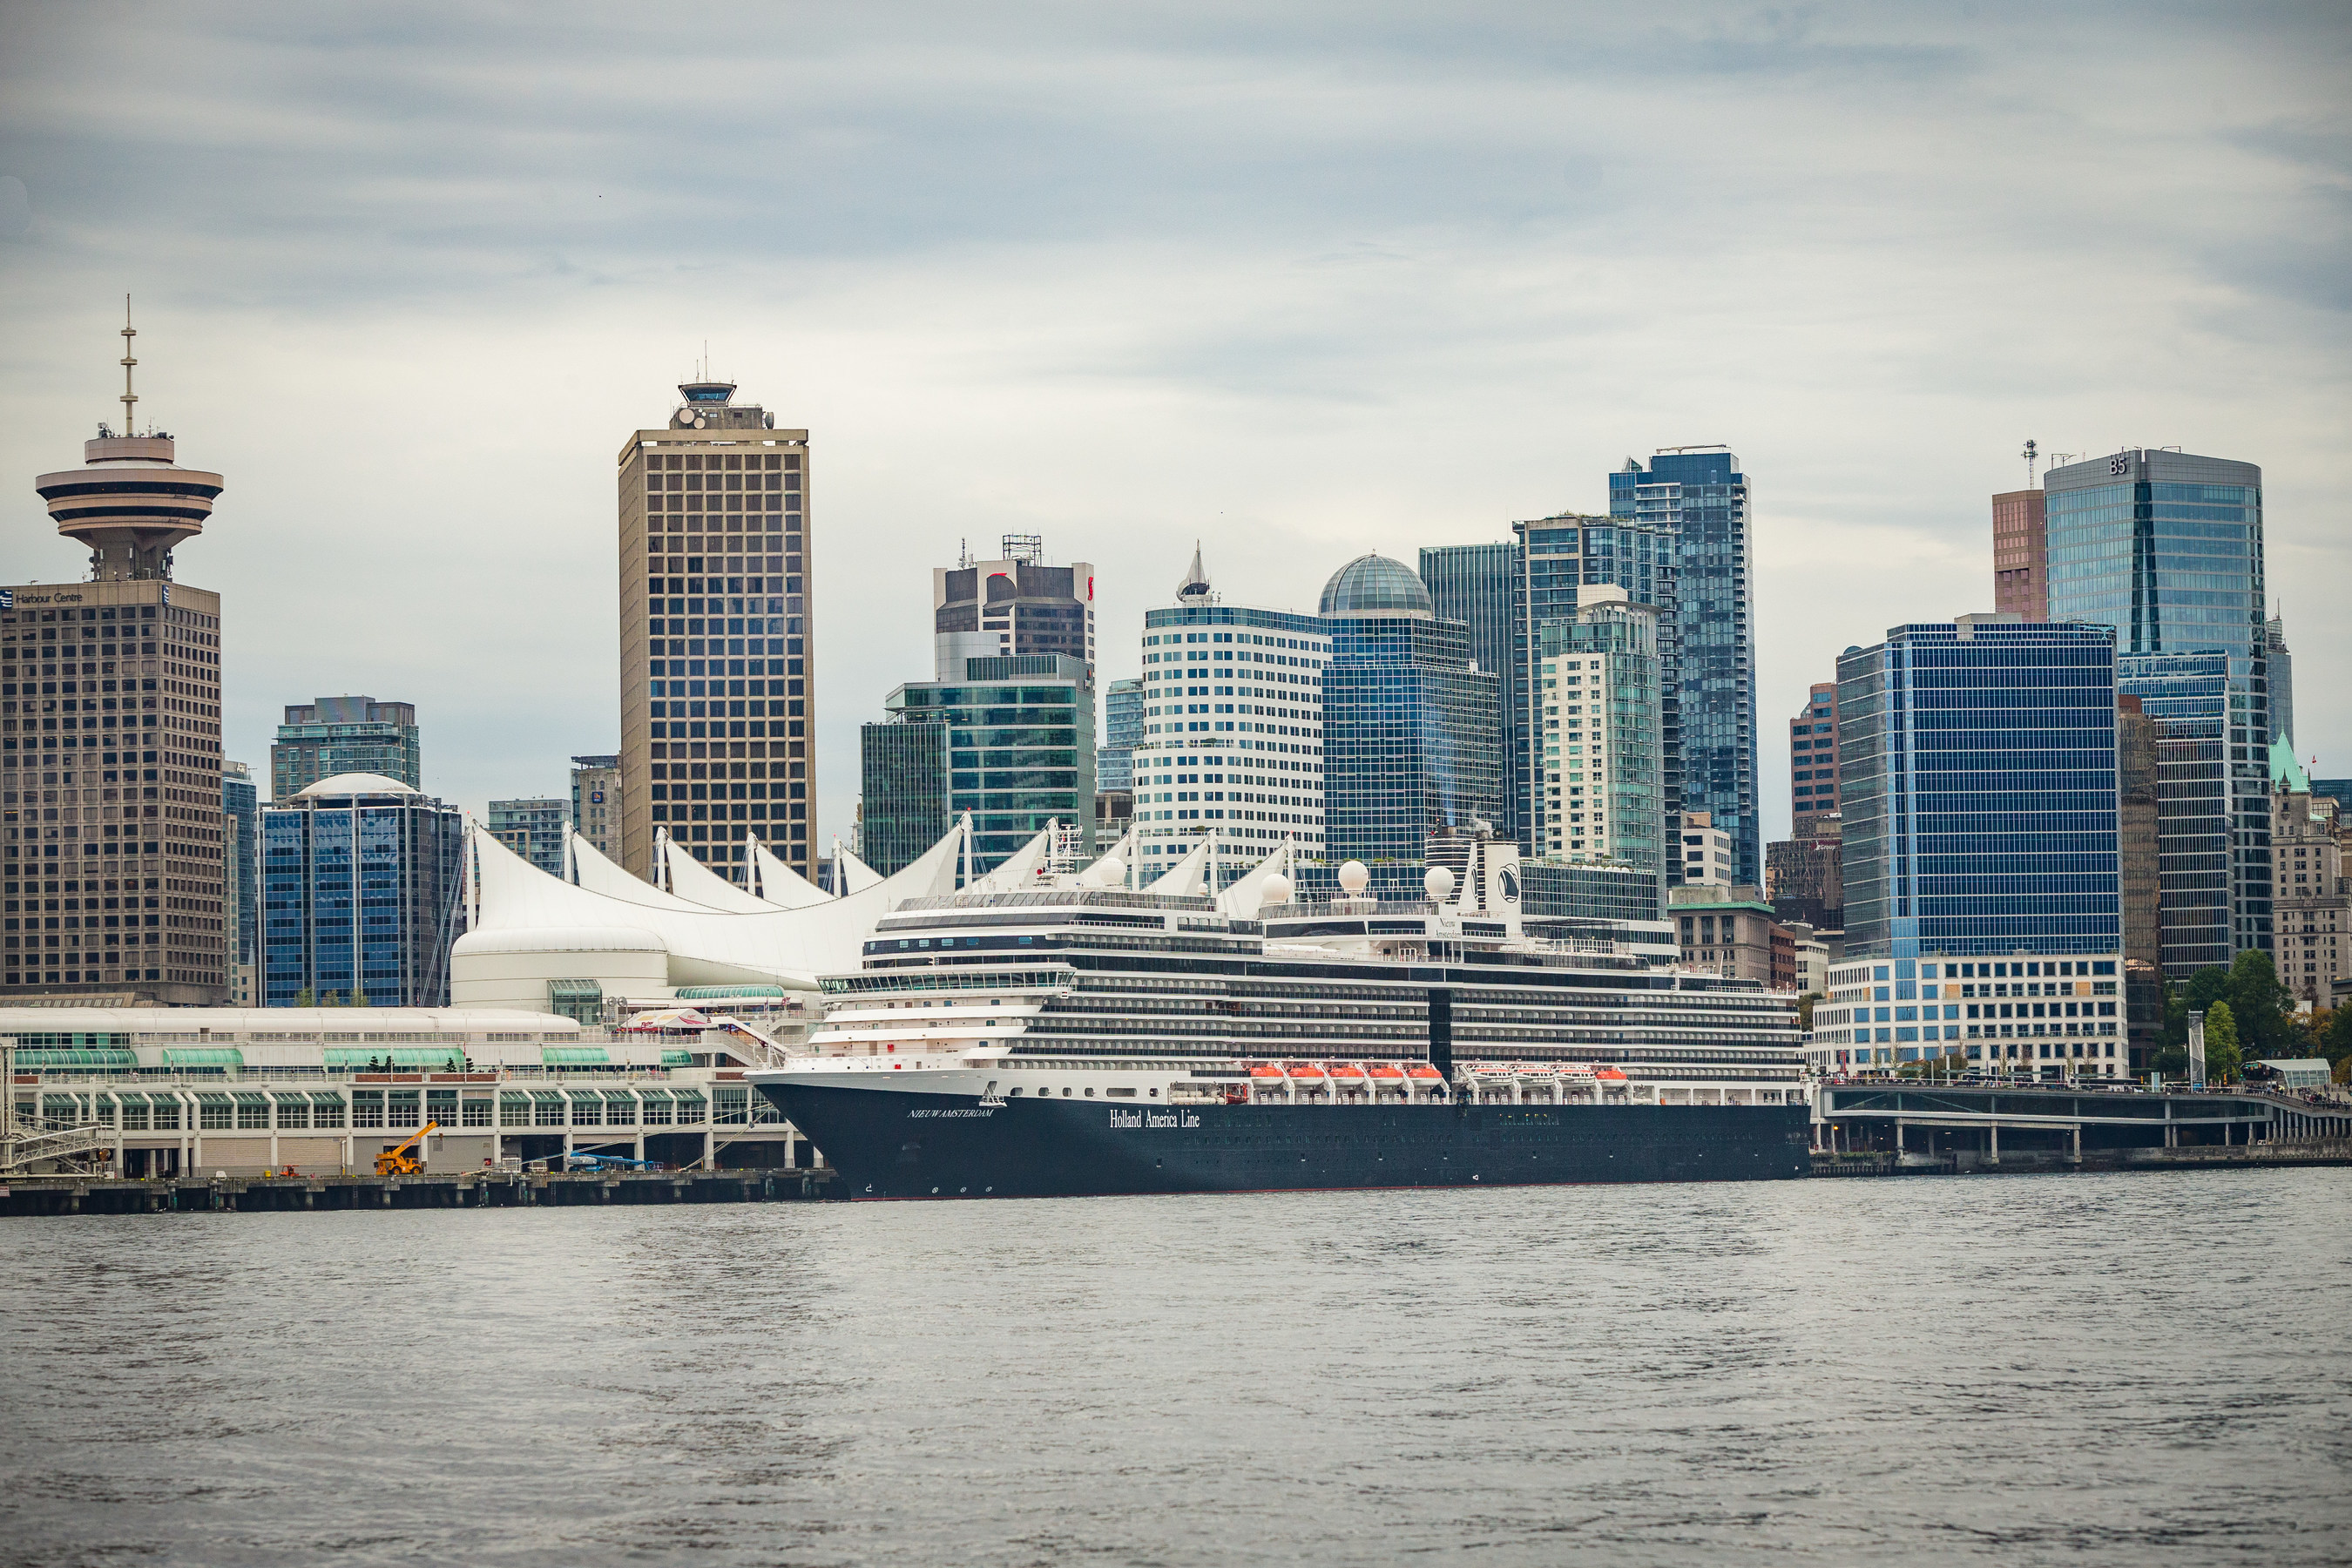 Four Holland America Line ships will sail to Alaska this summer from homeport Vancouver, British Columbia, now that cruise ships are permitted to operate again from Canadian ports after a two-year pause (March 2022)